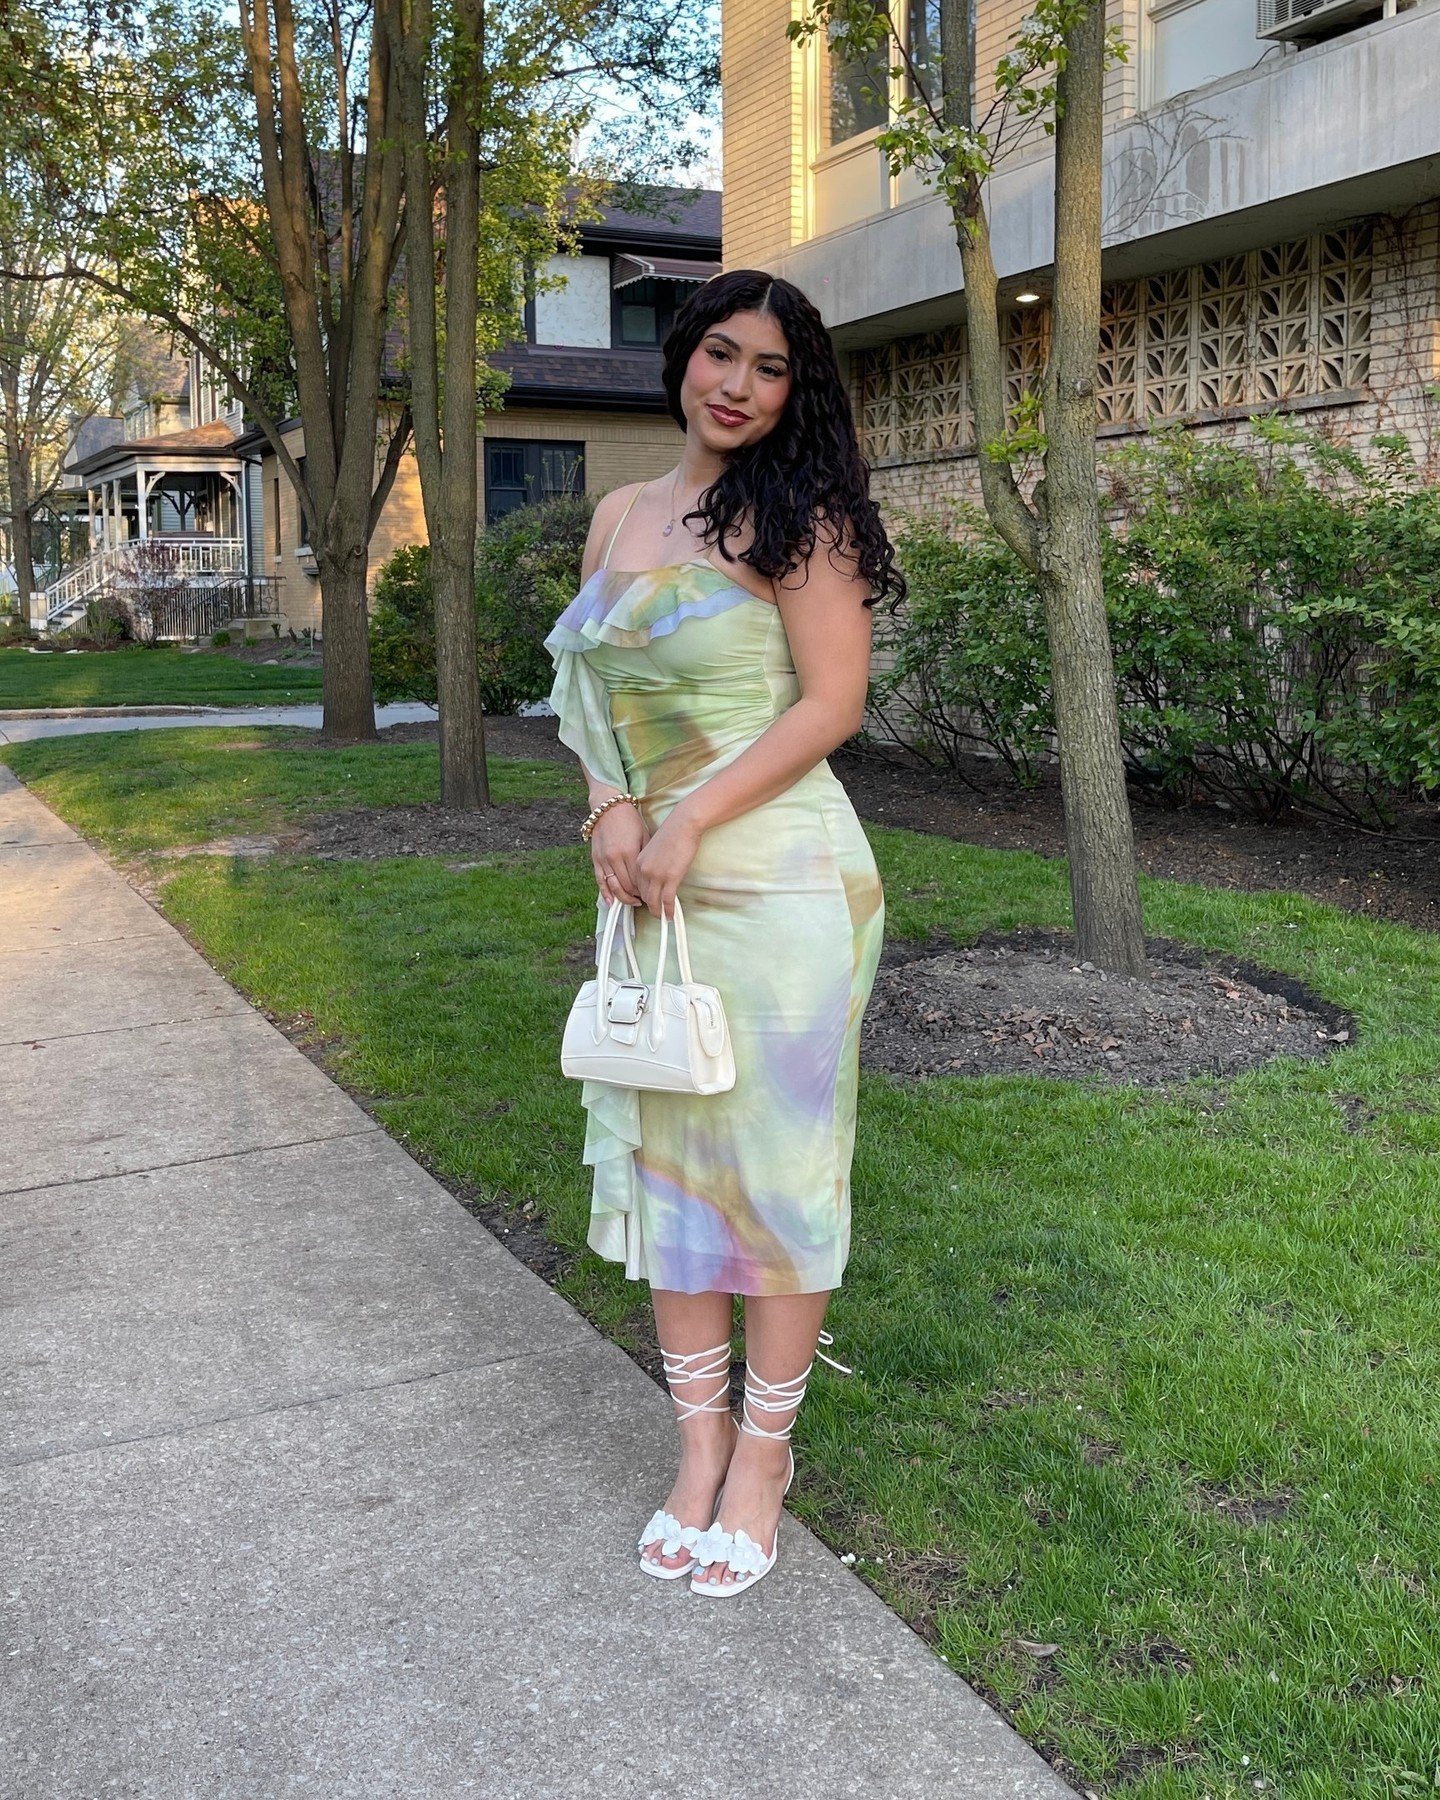 Save this post for spring dress inspo. 💐 Beauty, @jackyy.julii styling our current midi dress obsession. Tap for product details below - shop her style in-store now! ✨ @discoveryclothing⁠
⁠
Print Dress With Ruffle: #HF24C822 - $25.99